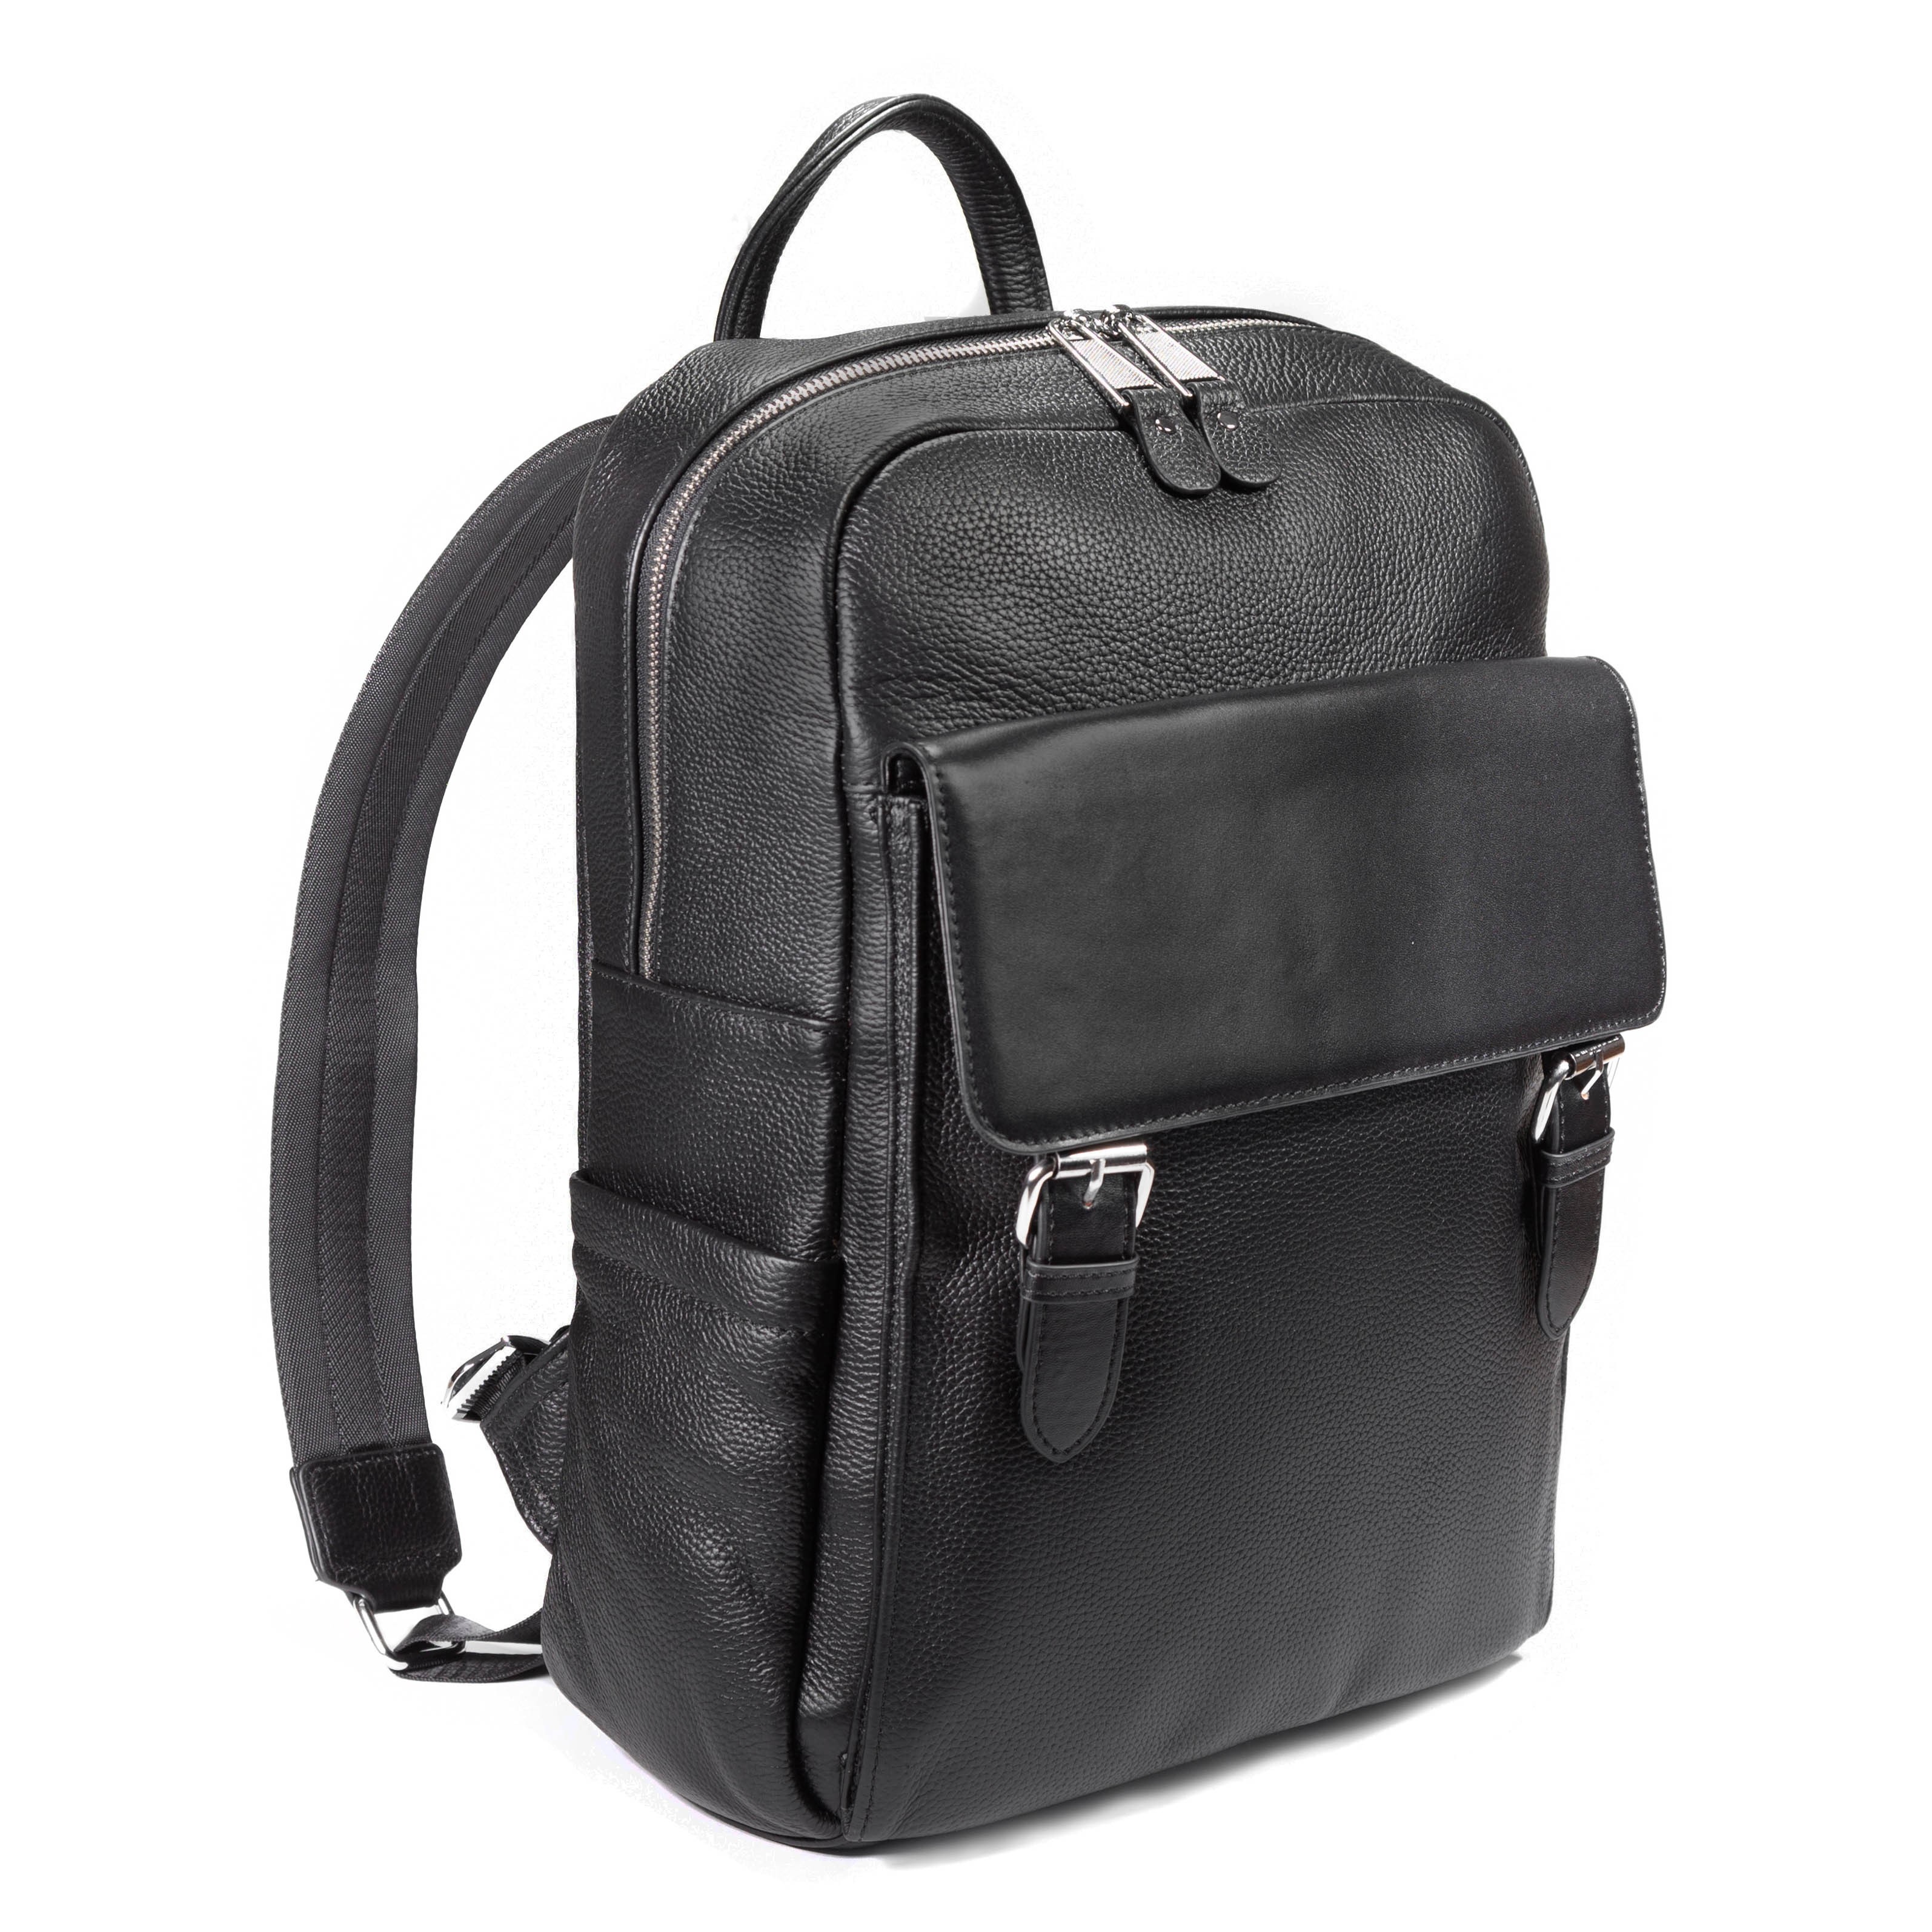 Falcon Leather Twin Buckle Backpack - FI6717 Black - Backpack - Falcon